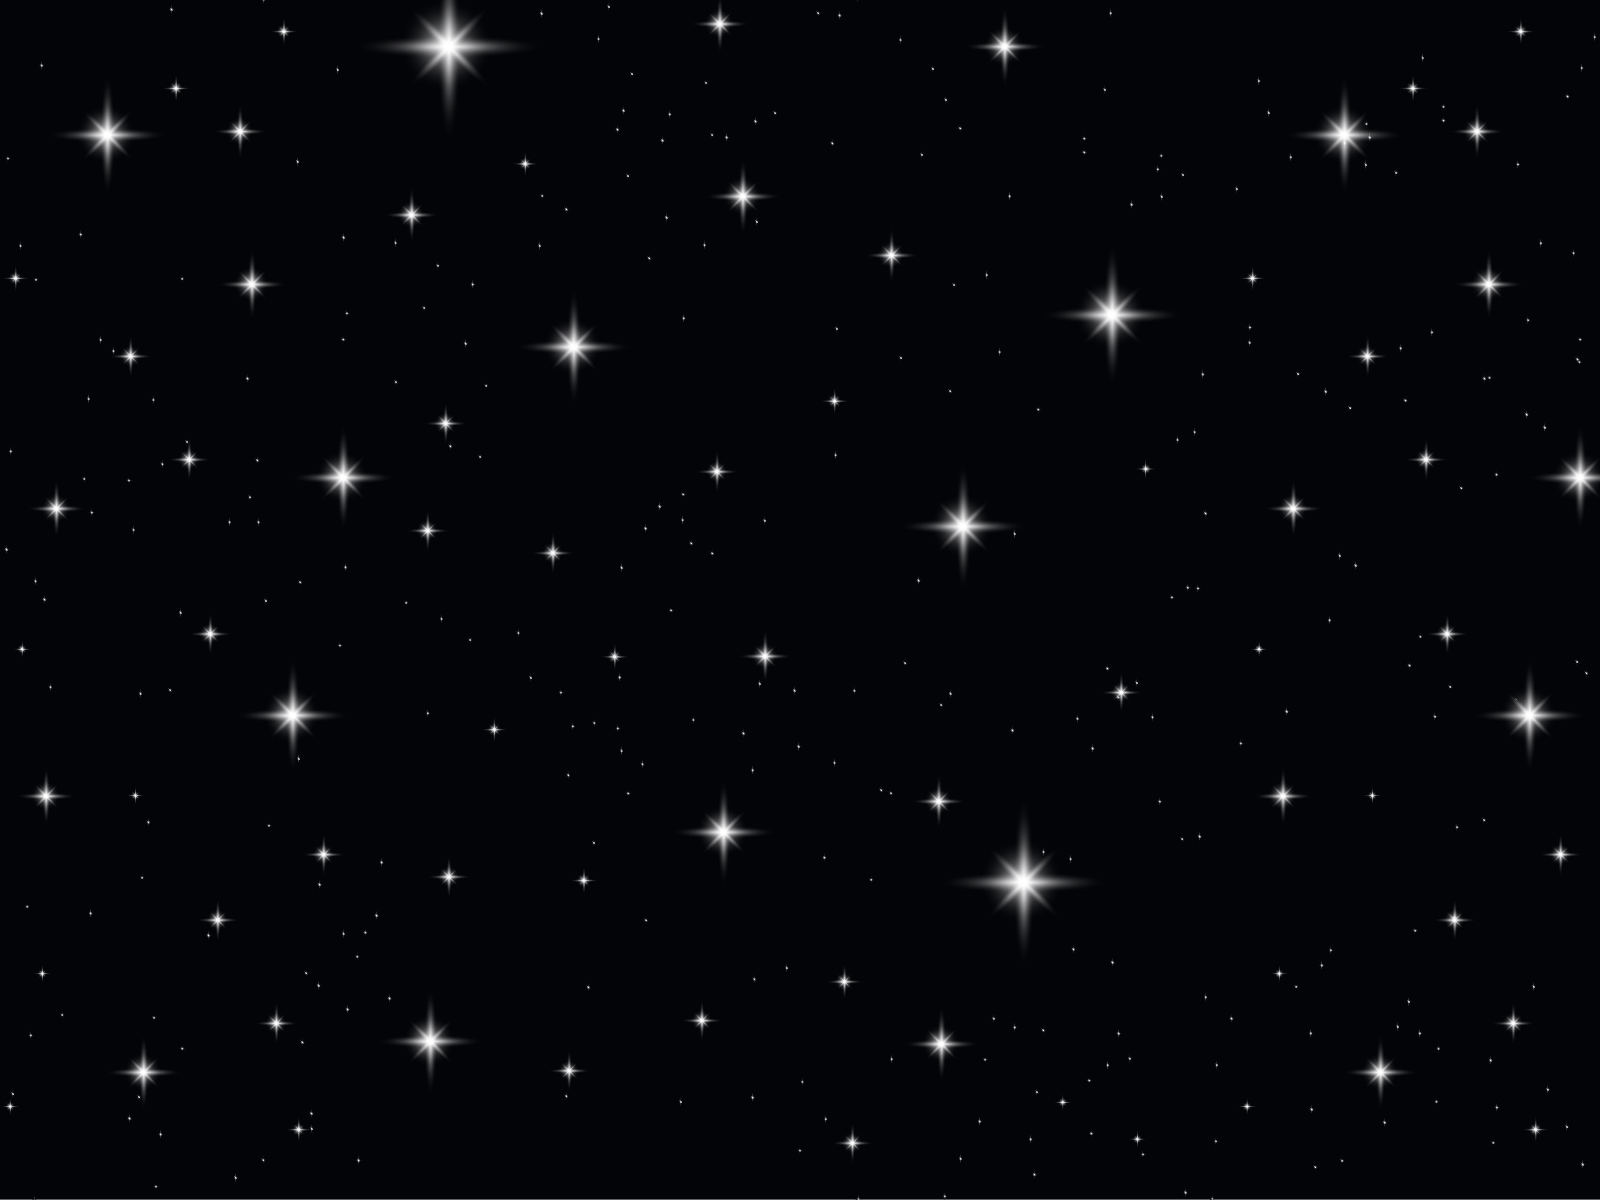 Stars at Night Powerpoint Templates - Black, Textures - Free PPT ...